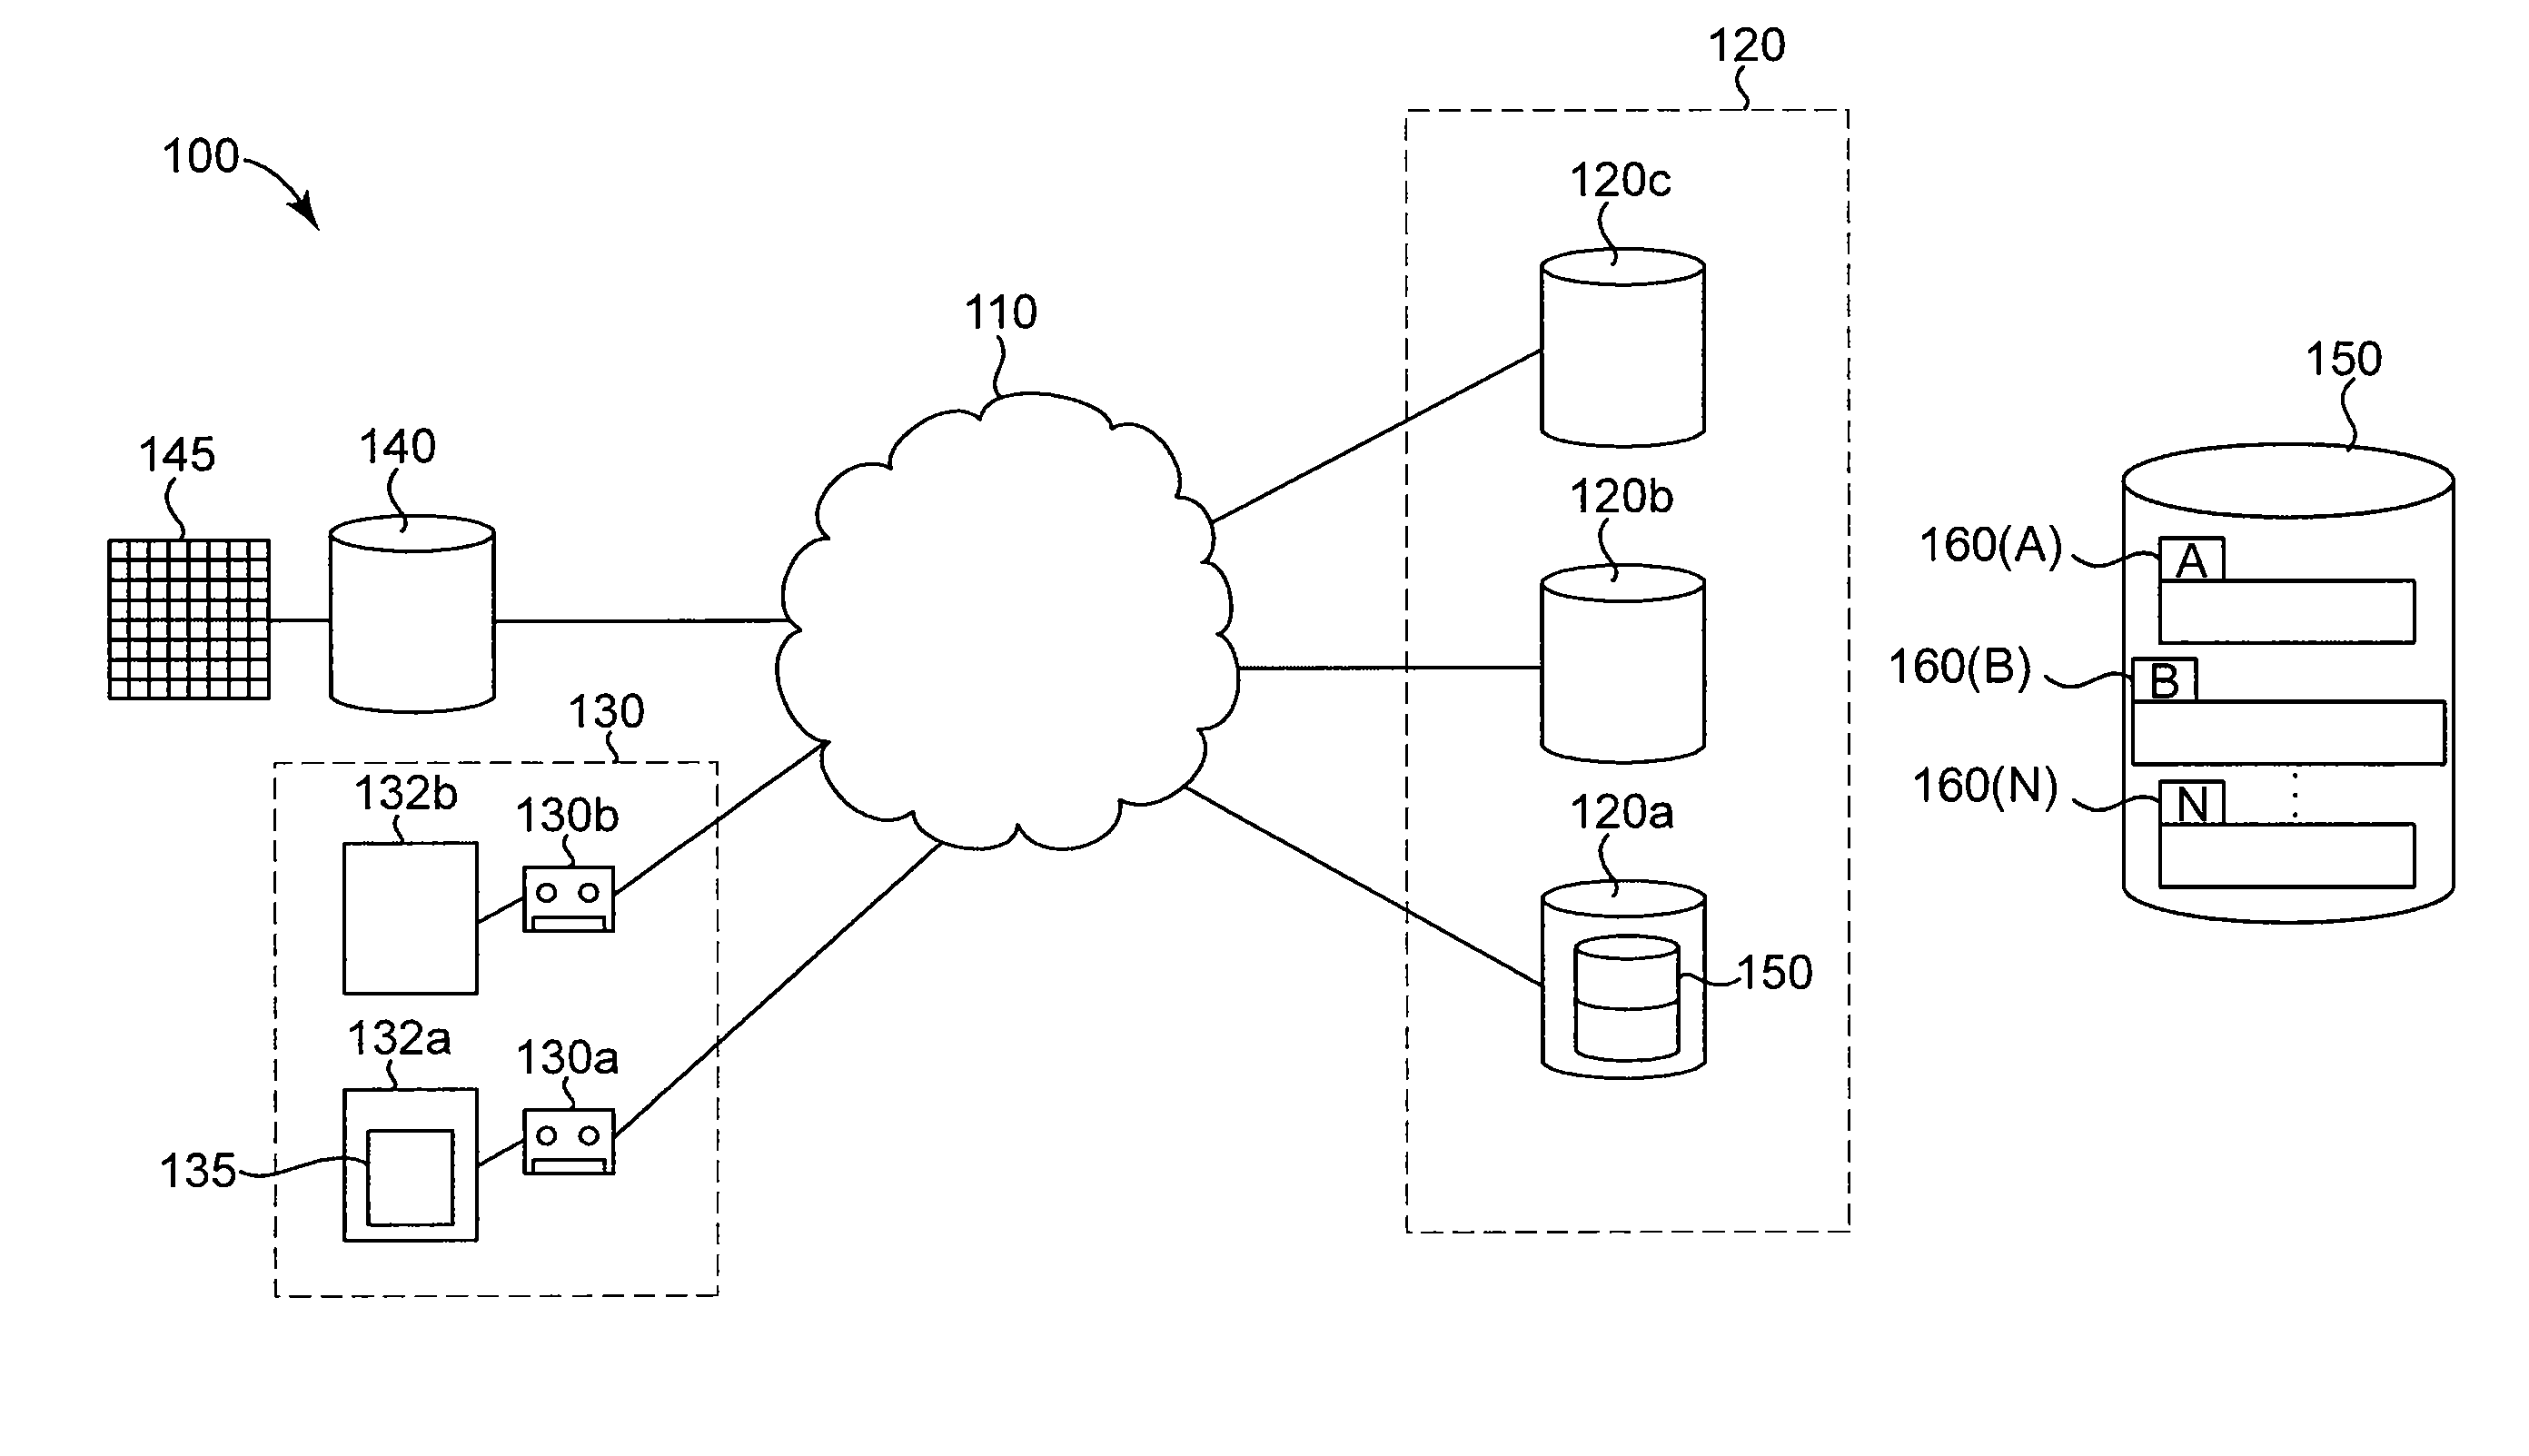 Enhanced method and system for assuring integrity of deduplicated data